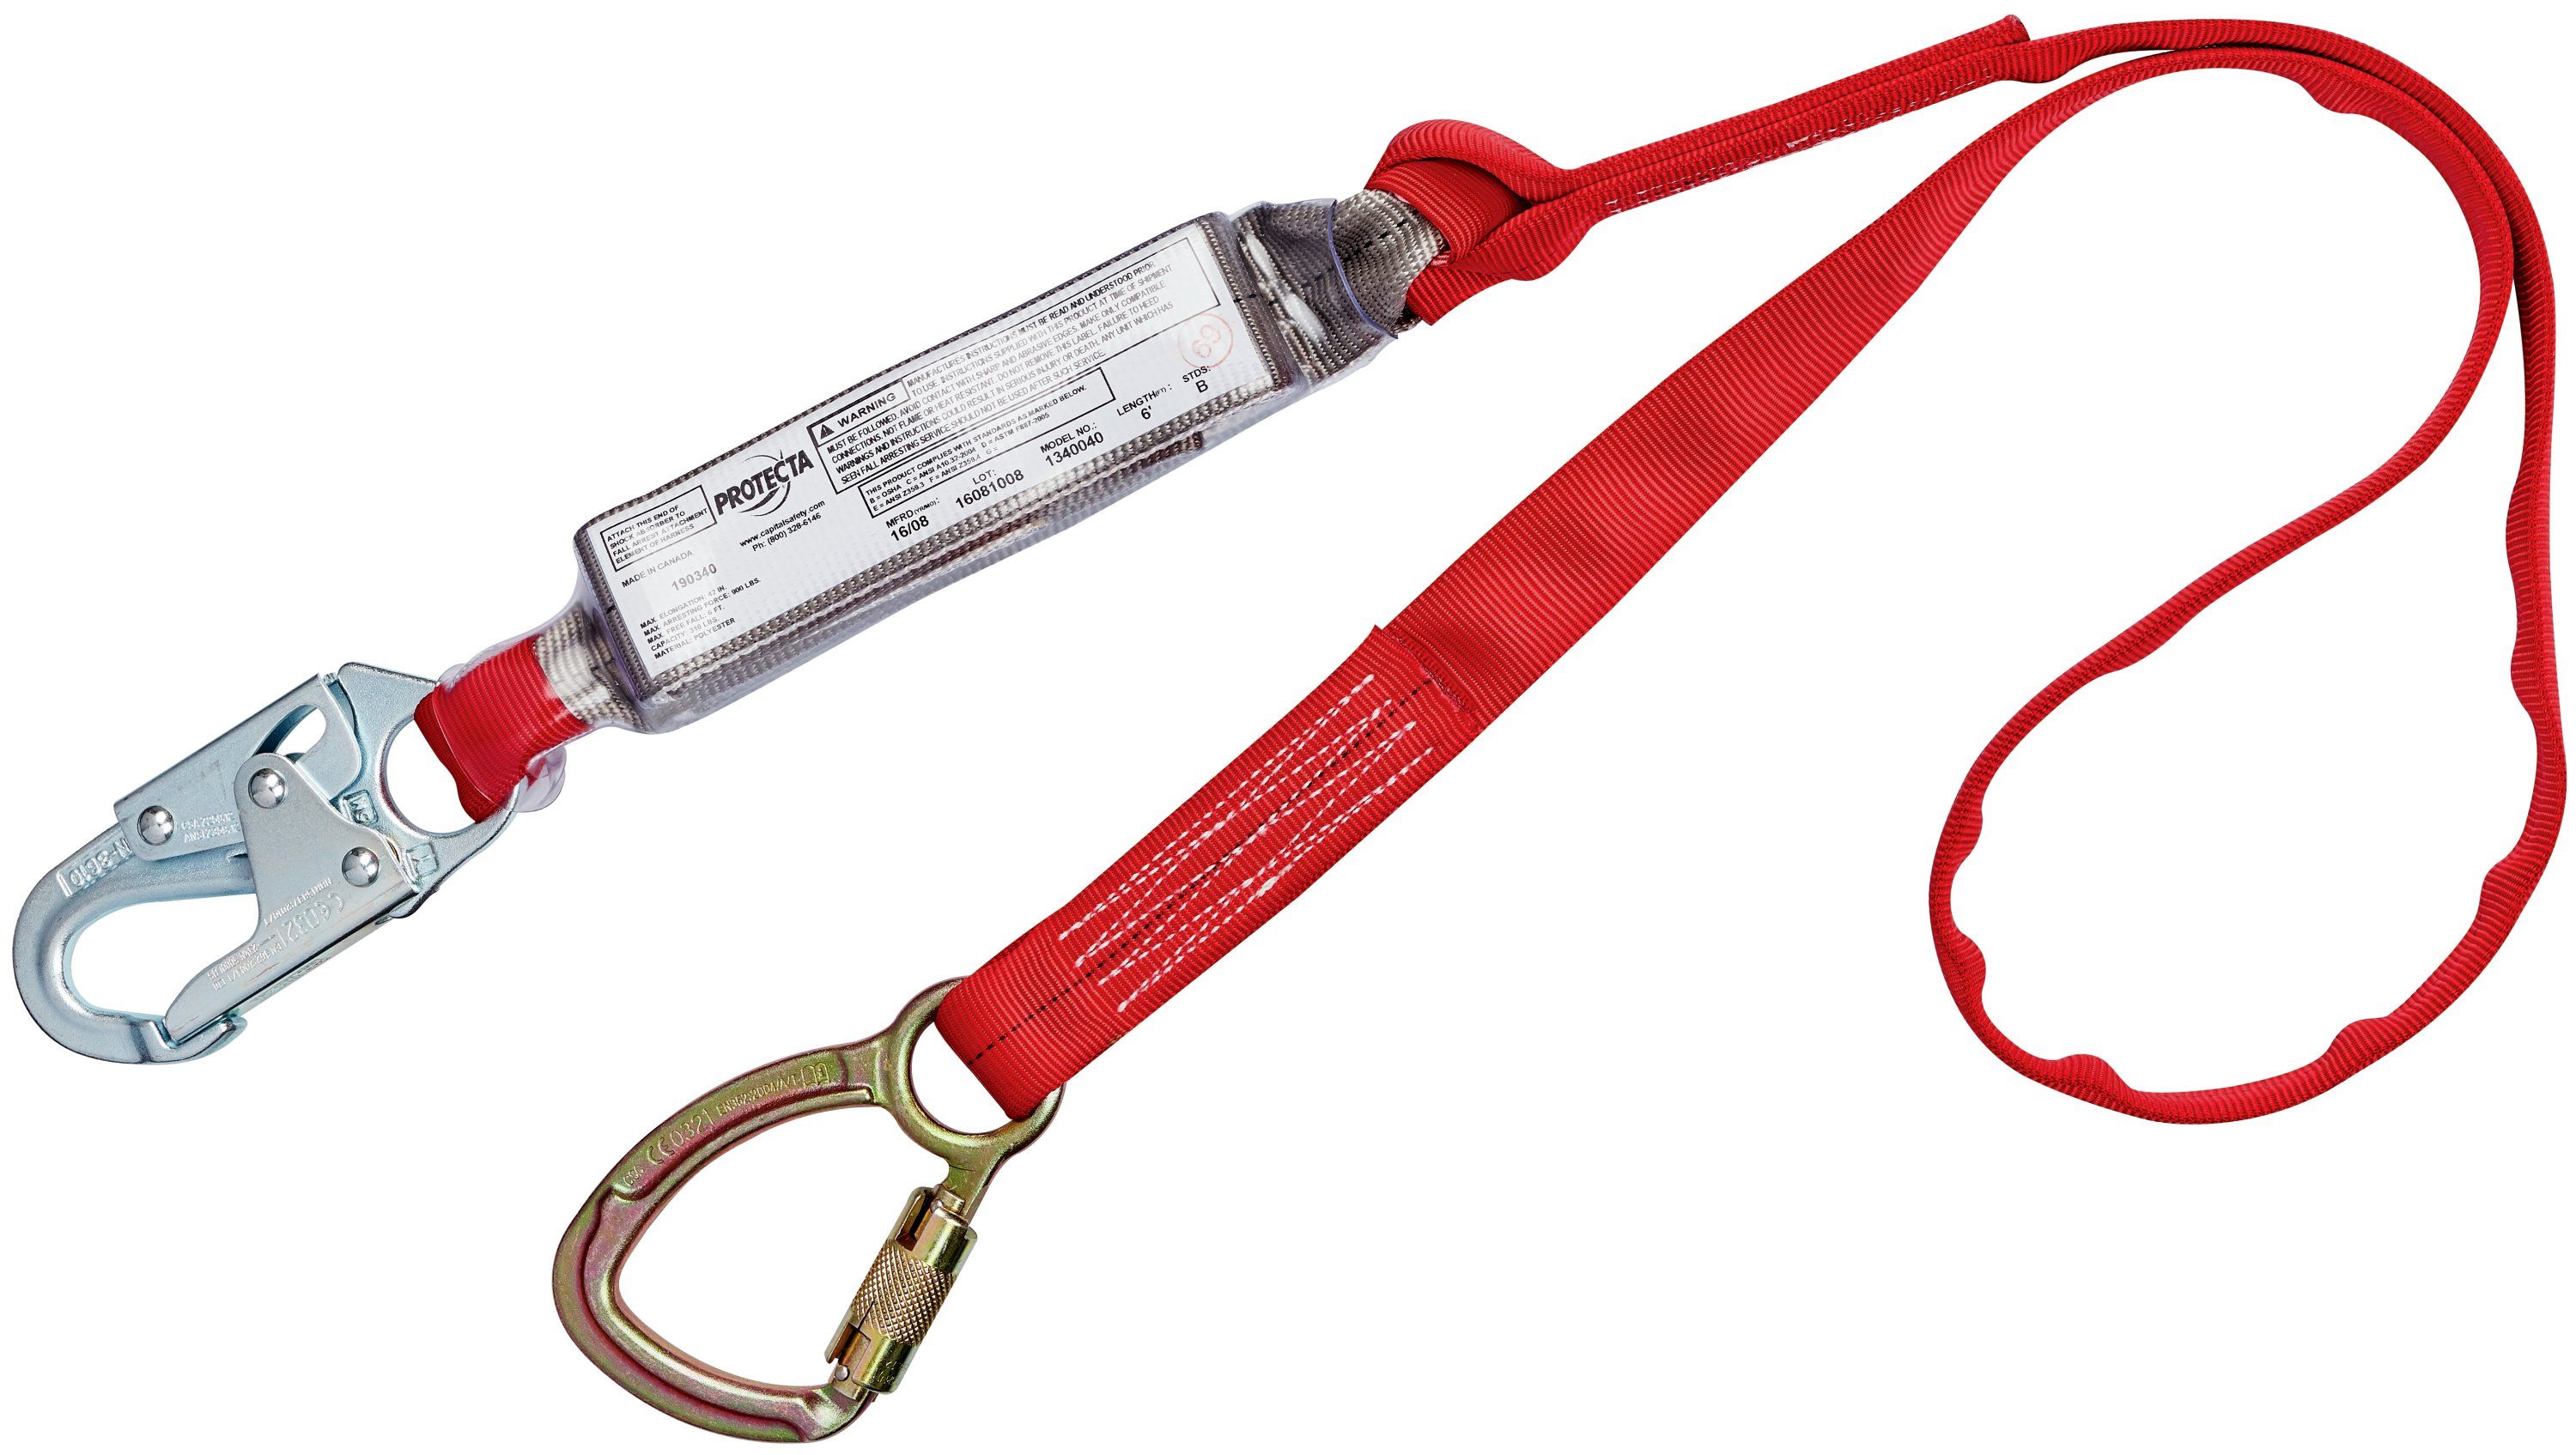 Portwest Web Fall Arrest Block Height Safety Harness Lock Water Resistant FP40